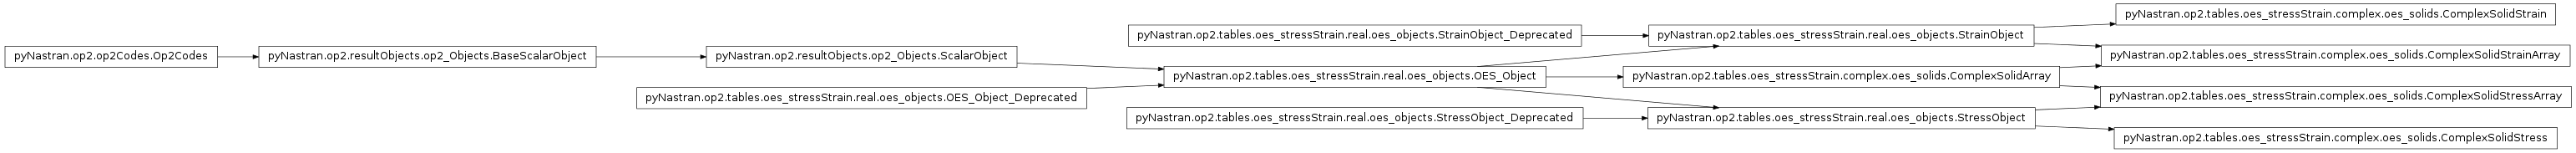 Inheritance diagram of pyNastran.op2.tables.oes_stressStrain.complex.oes_solids